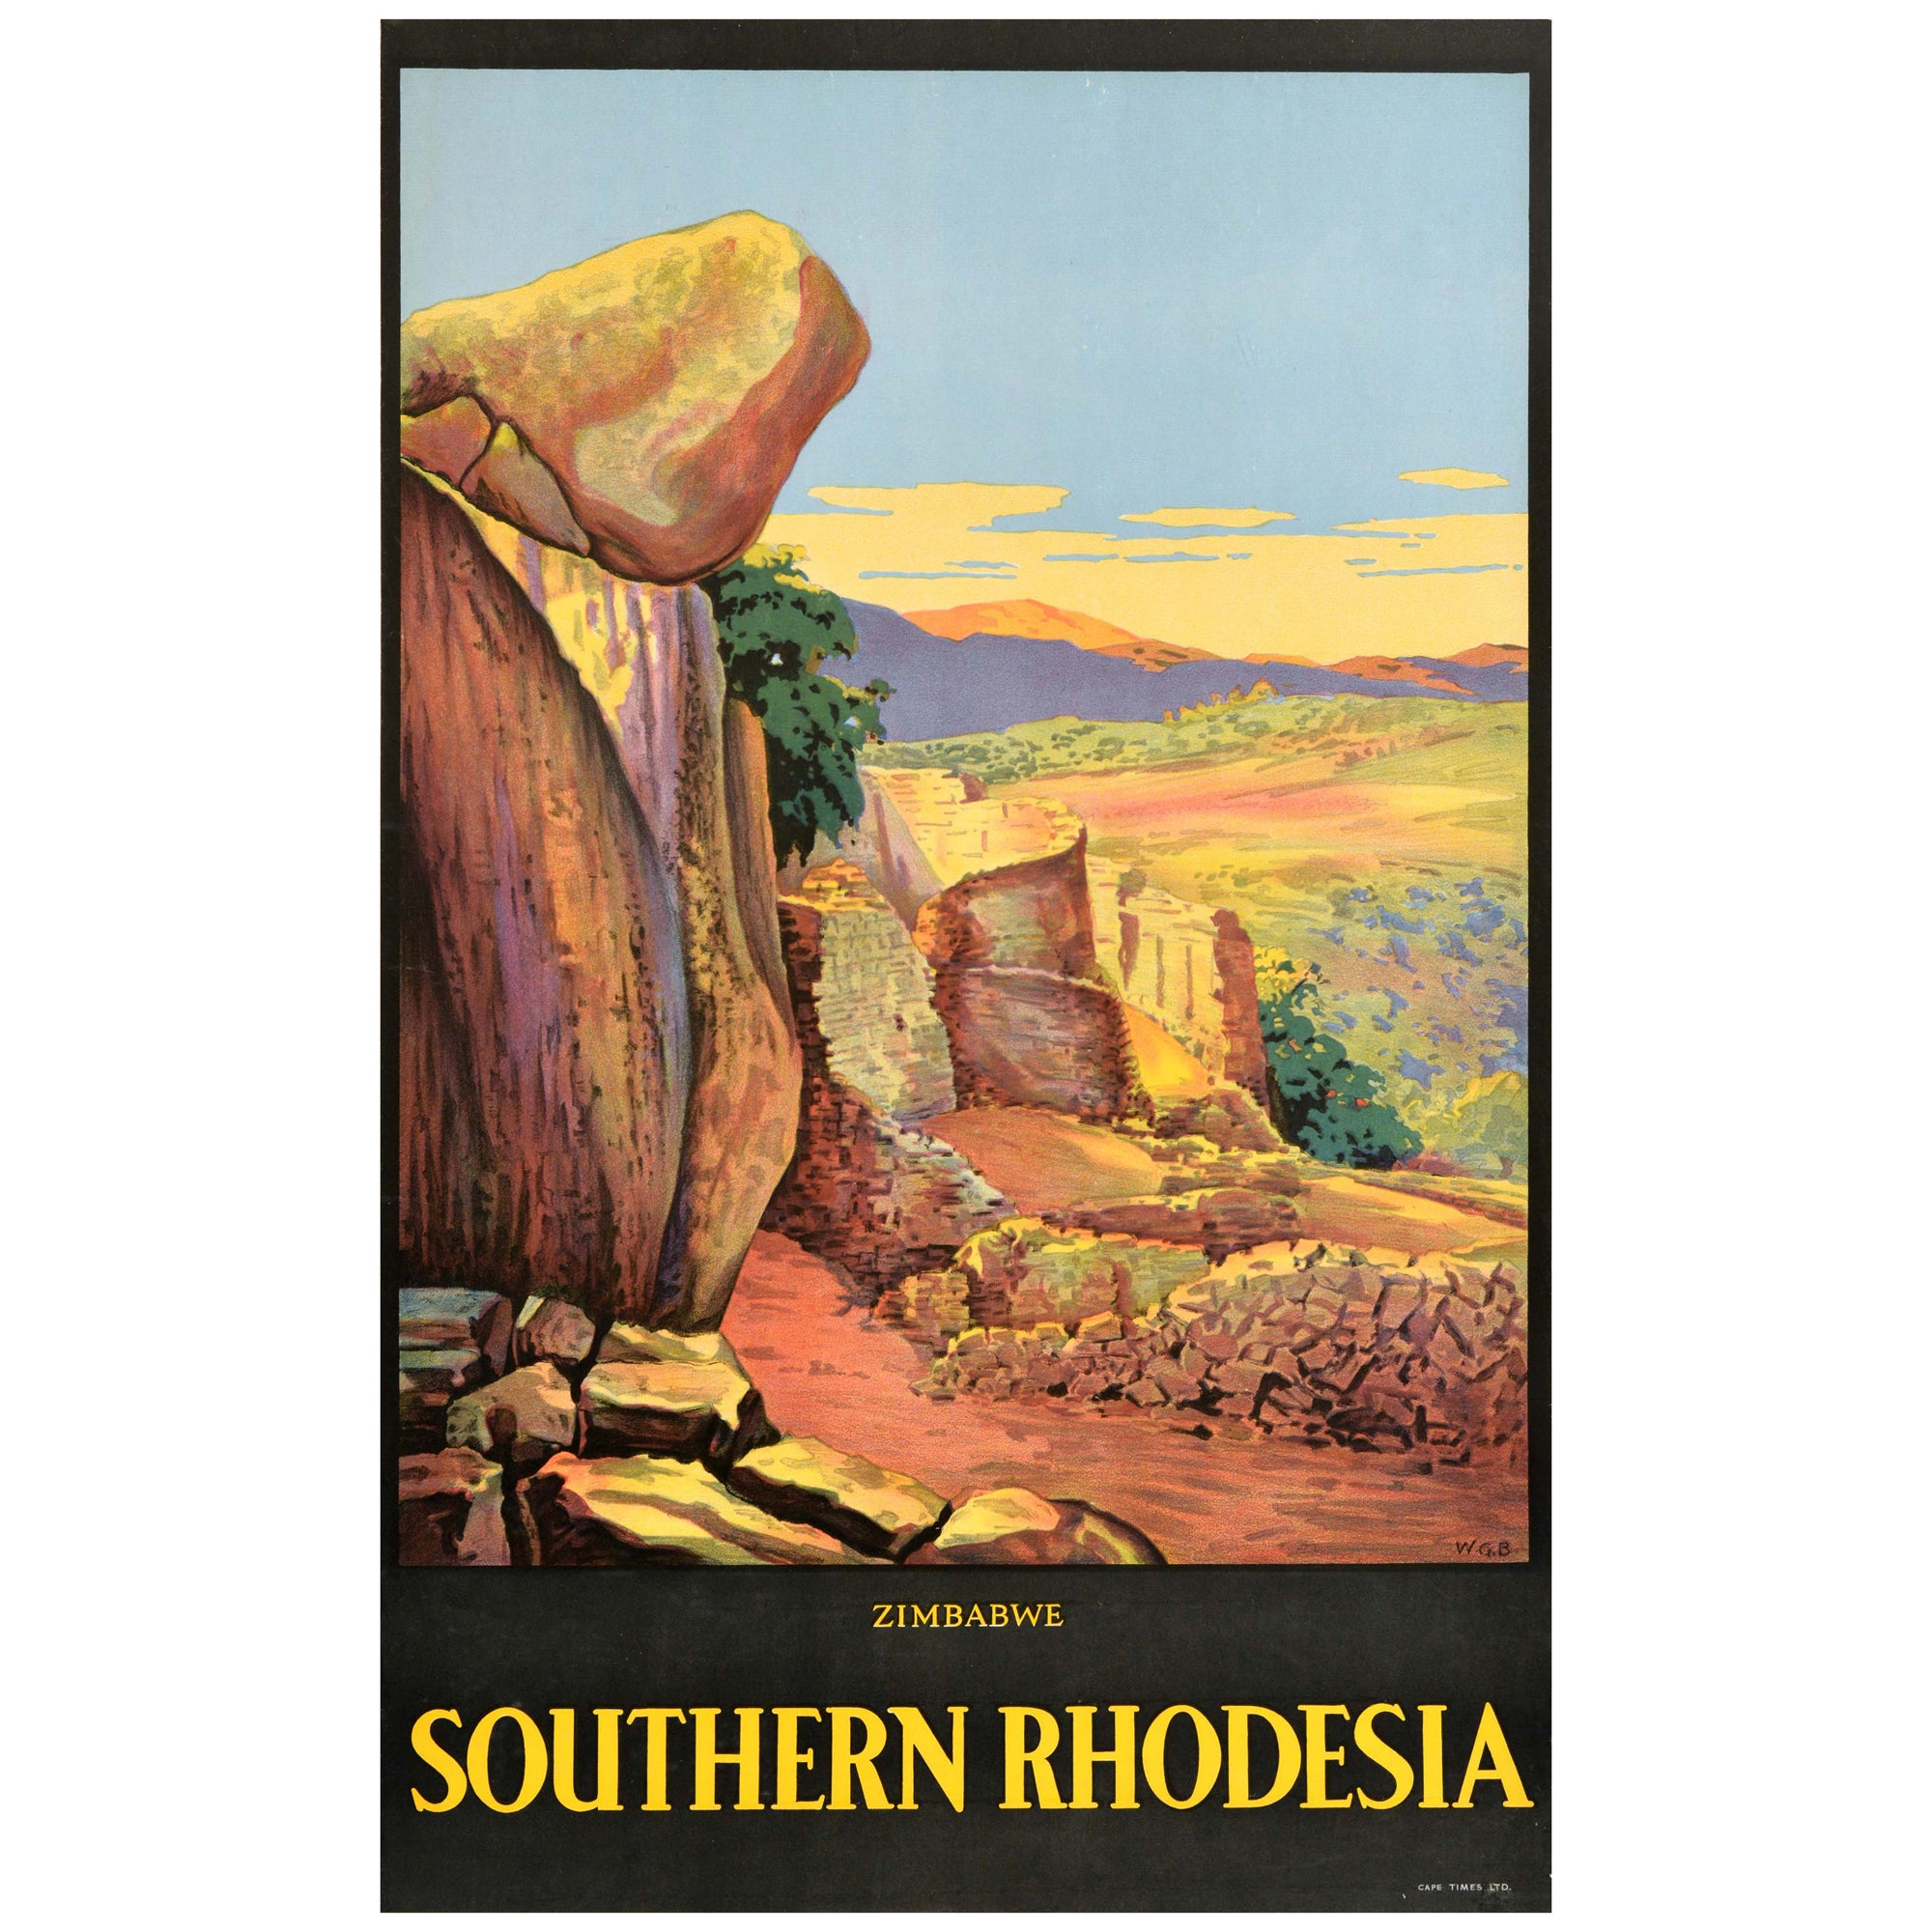 Original Vintage Africa Travel Poster Southern Rhodesia Zimbabwe Ancient City For Sale